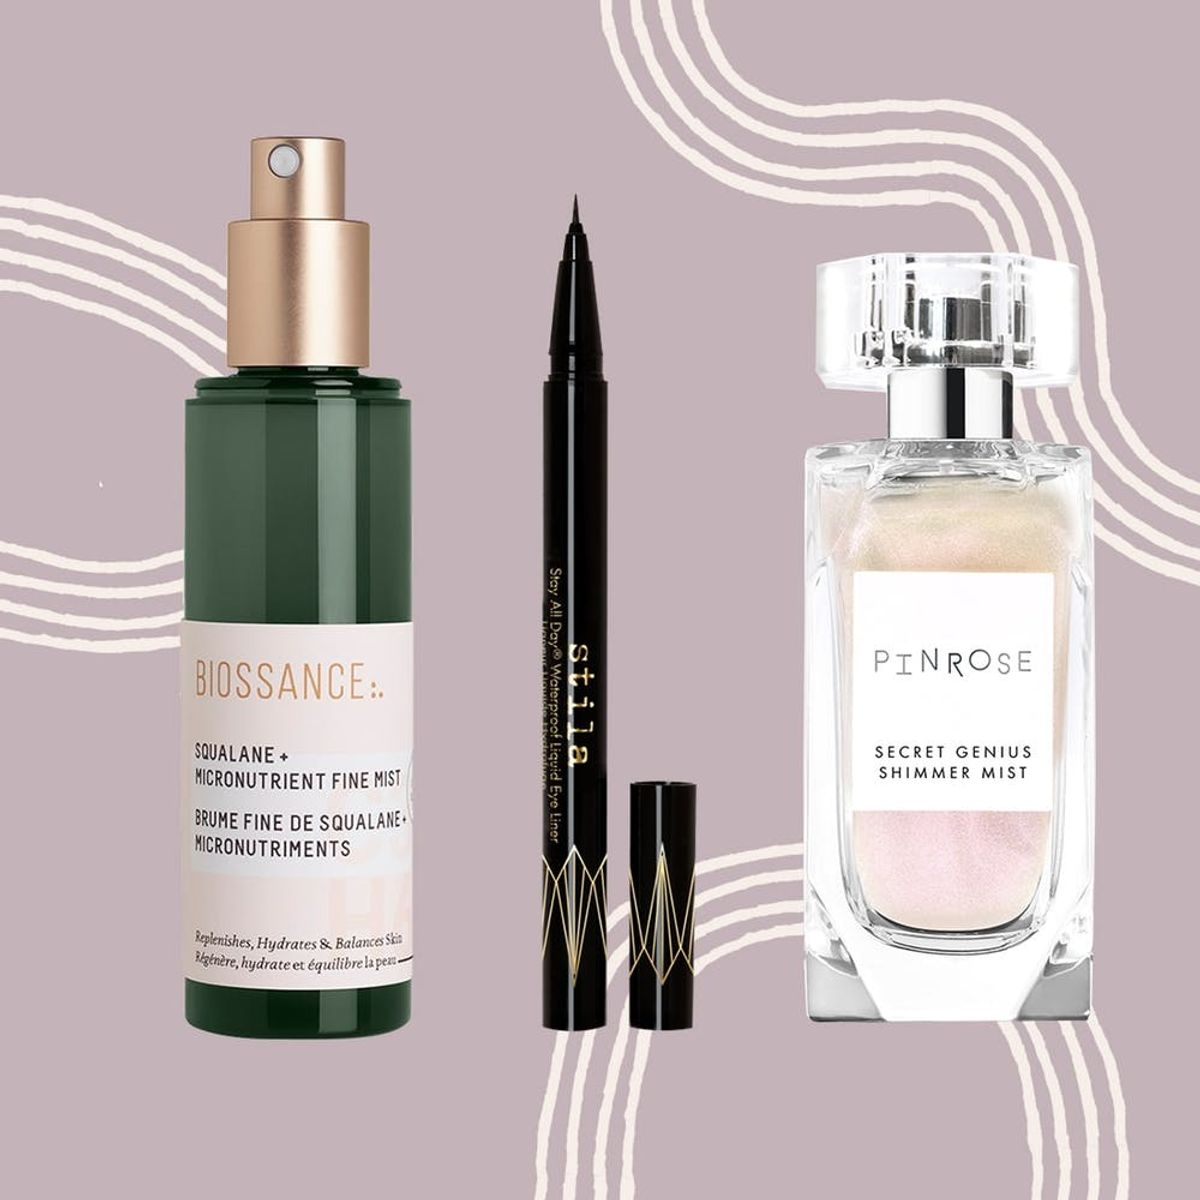 19 New March Beauty Products to Put a Spring in Your Step